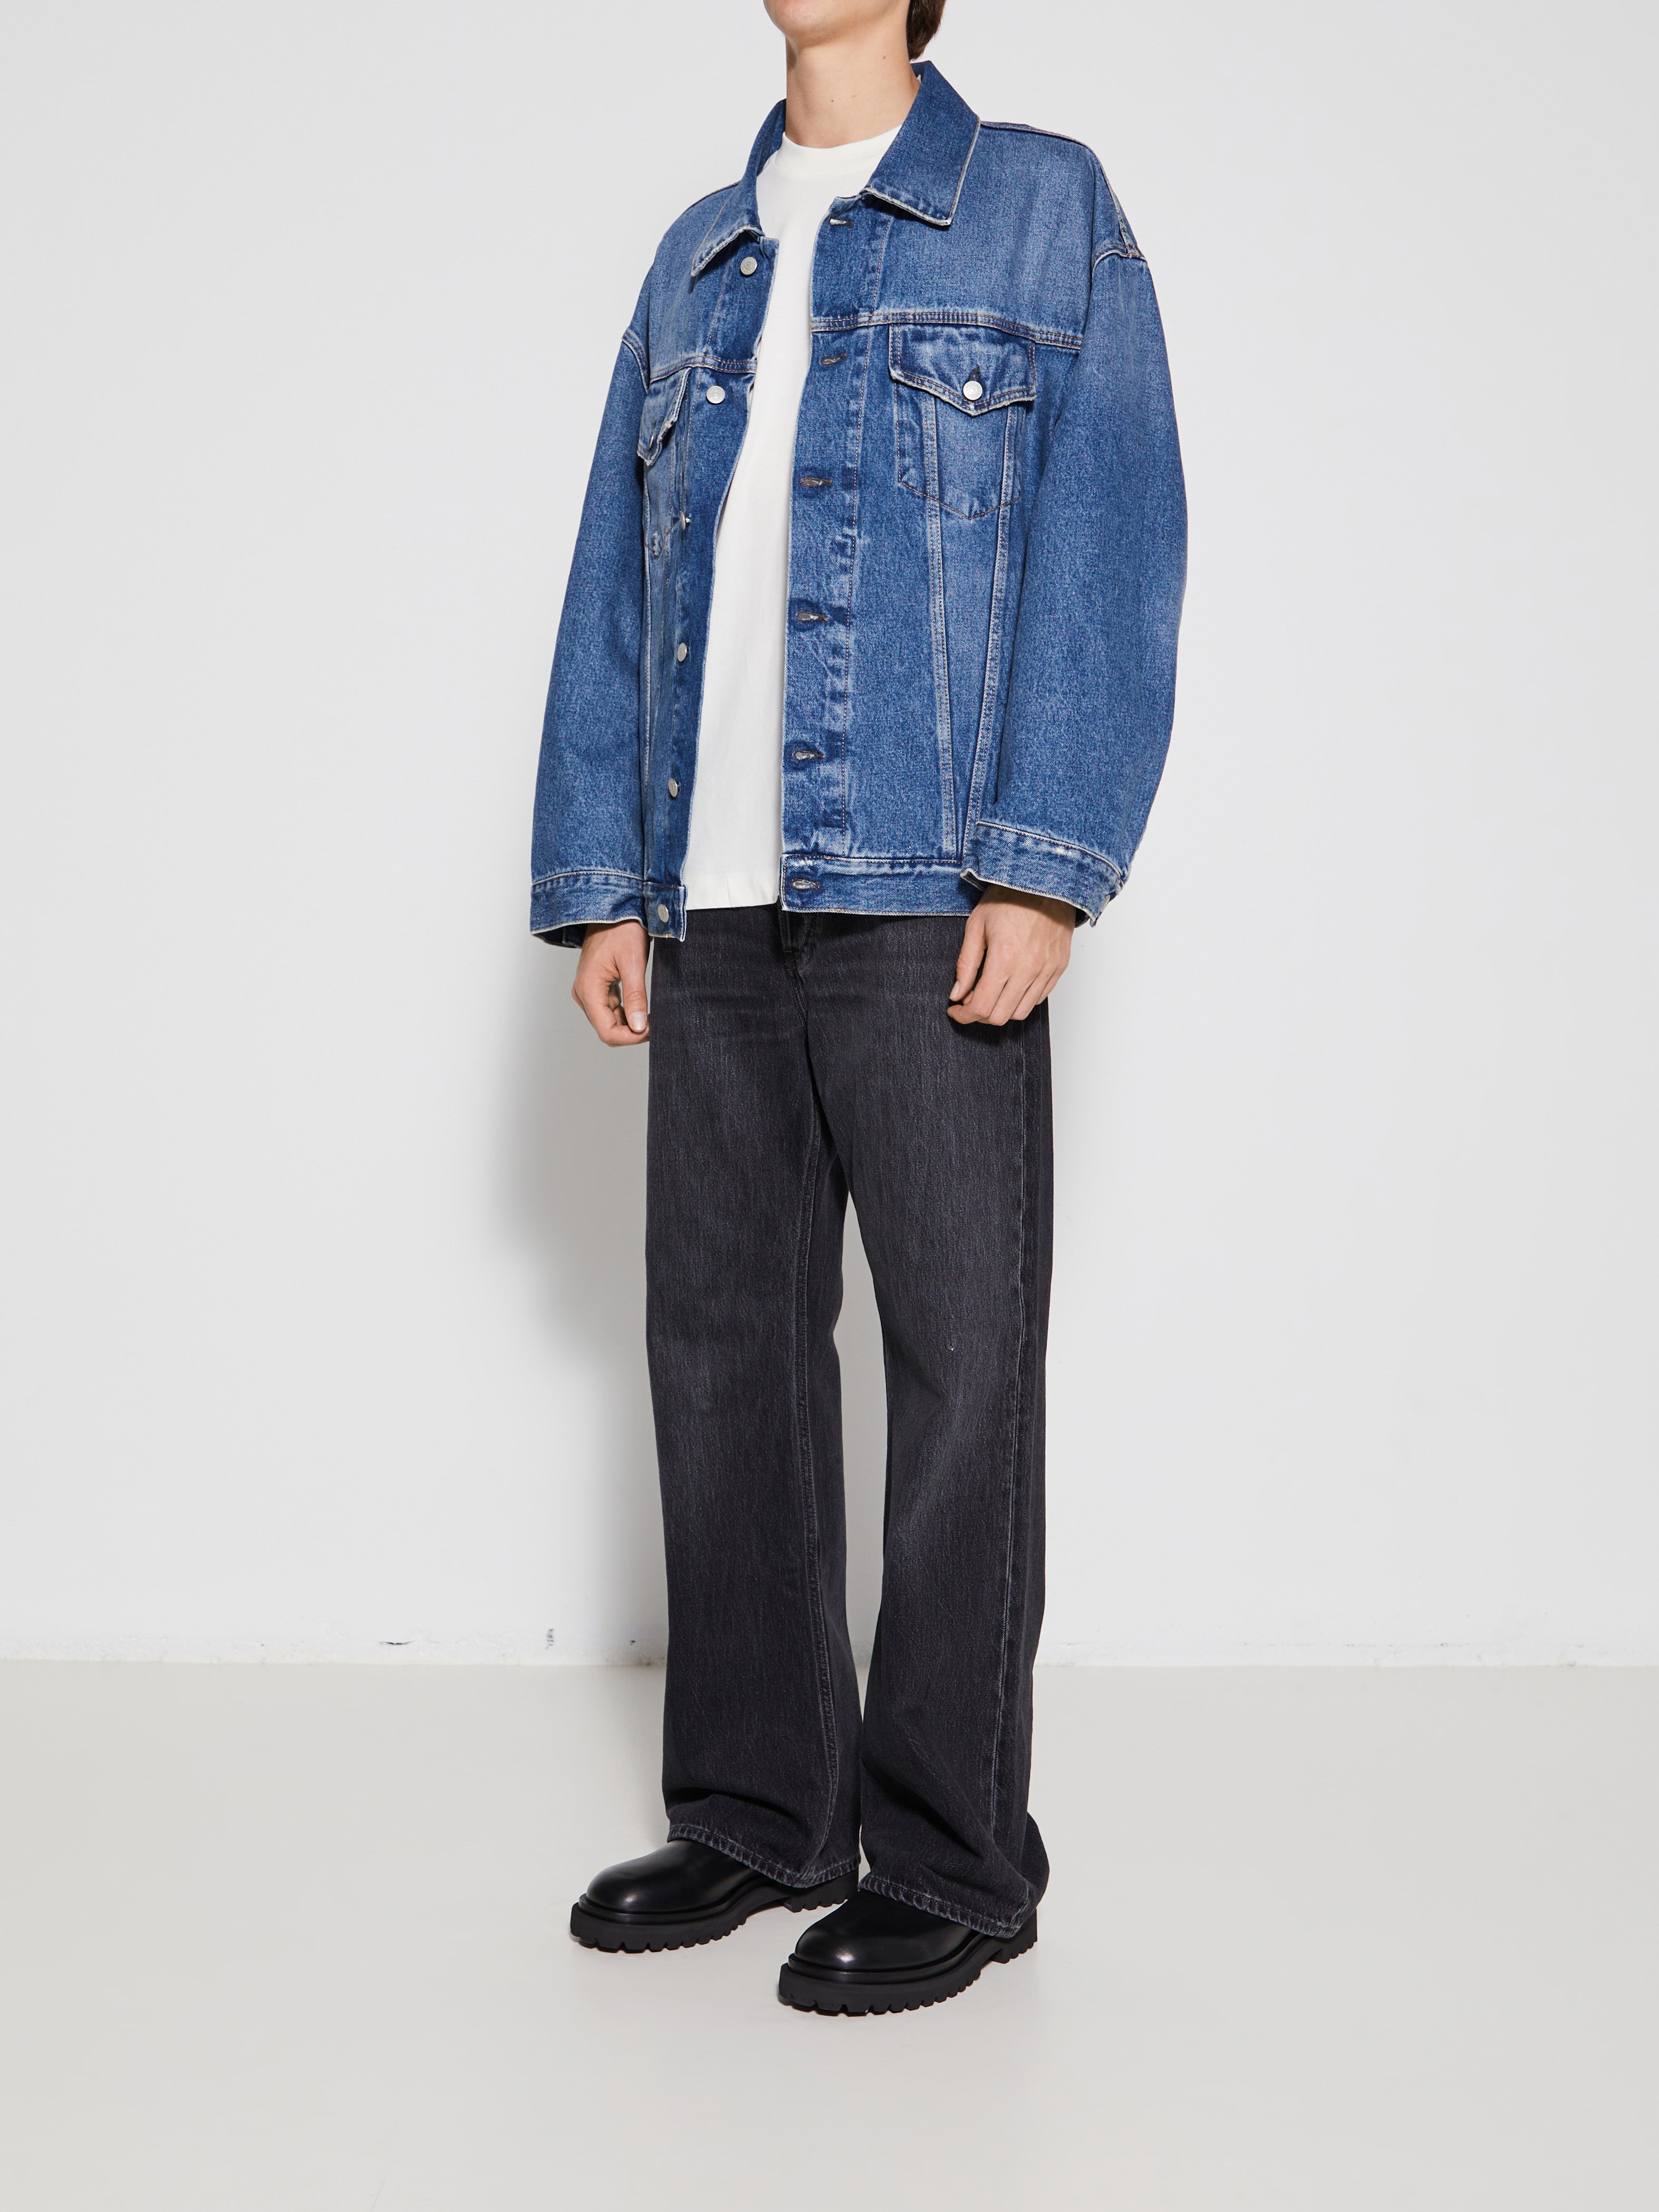 Acne Studios | Shop new arrivals from Acne Studios at stoy – Tag